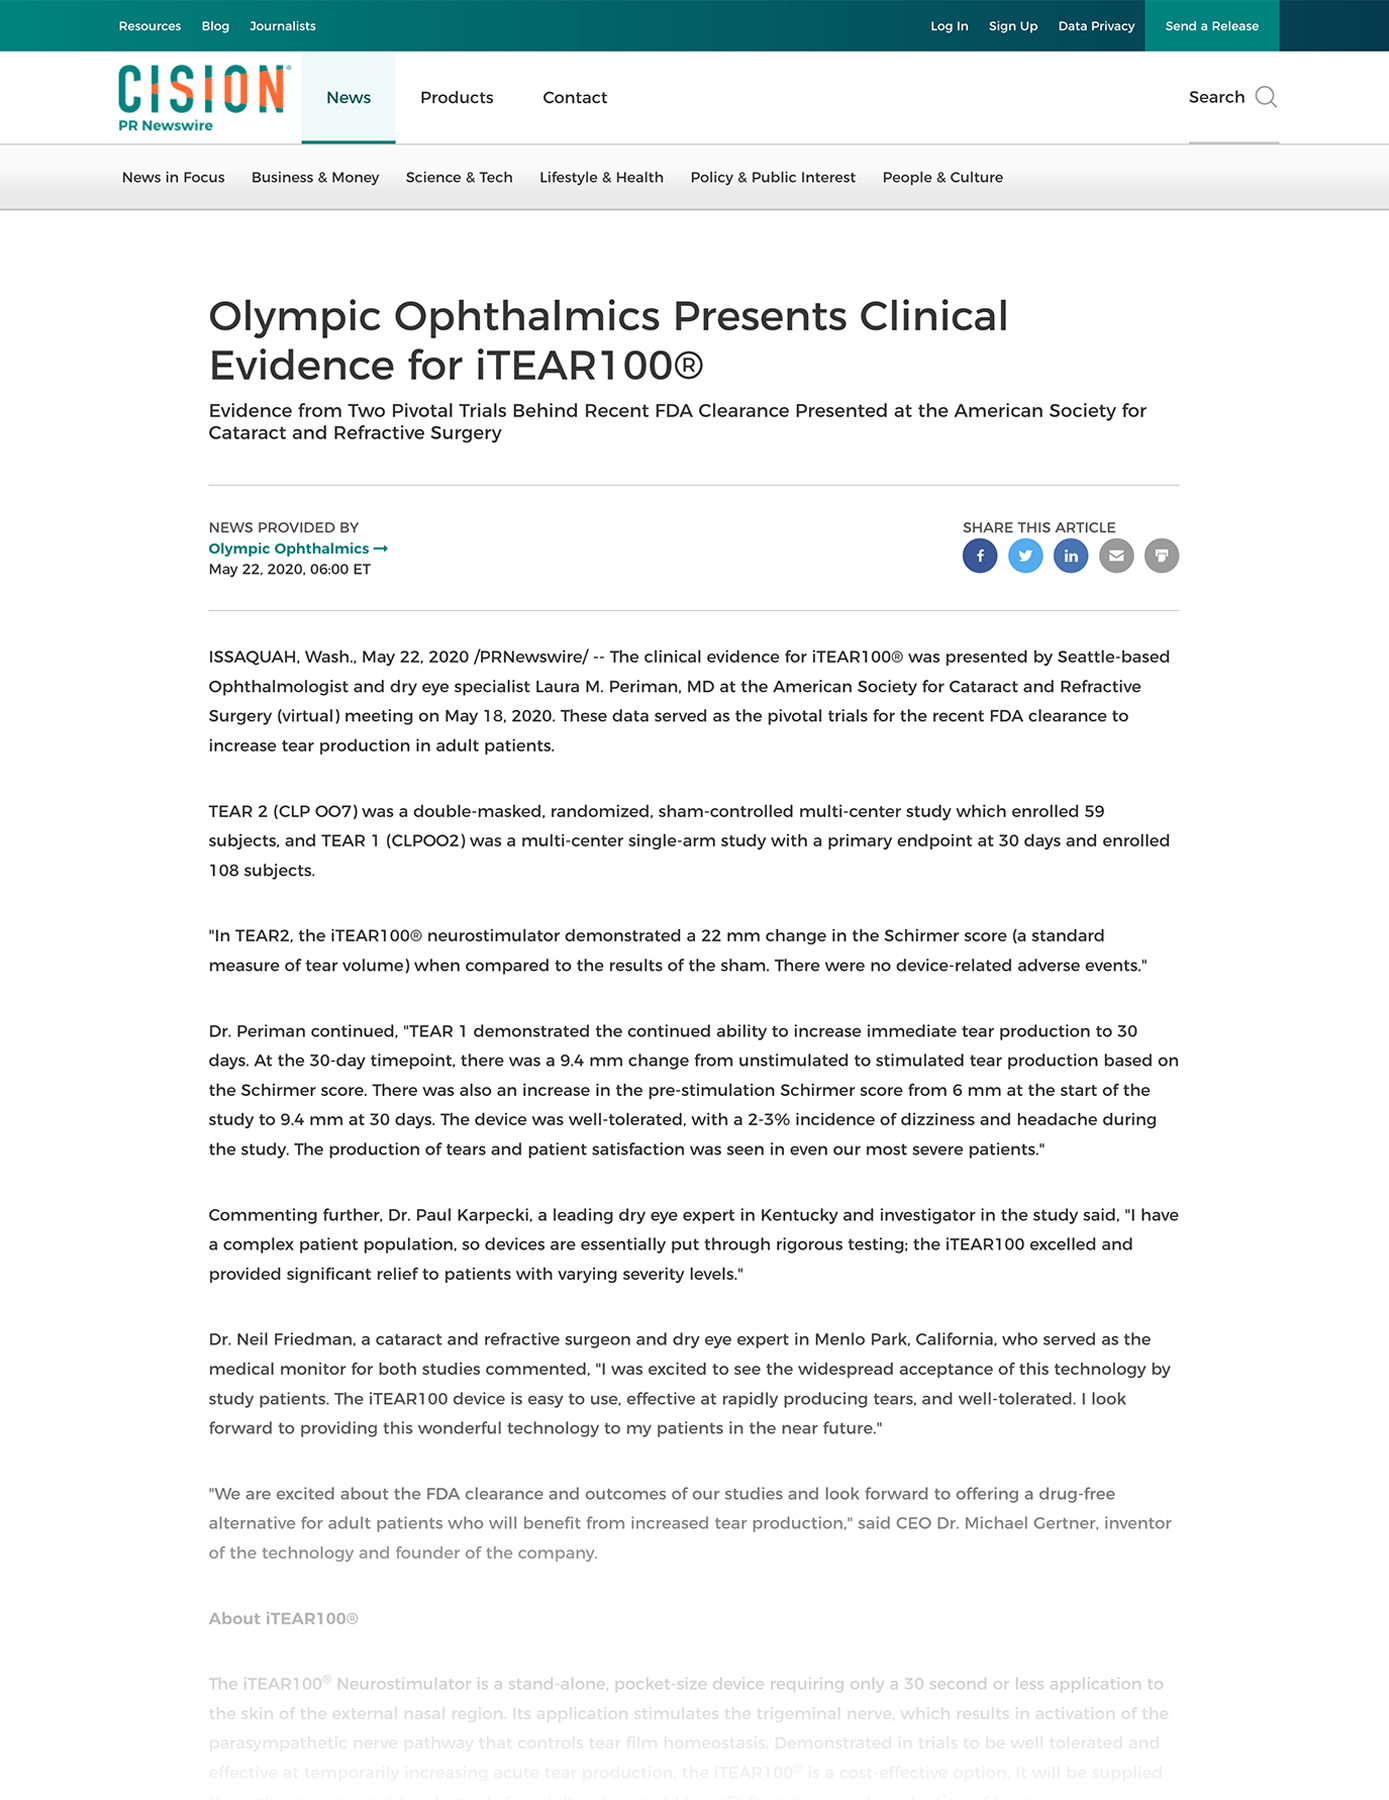 Olympic-Ophthalmics-Presents-Clinical-Evidence-for-iTEAR100